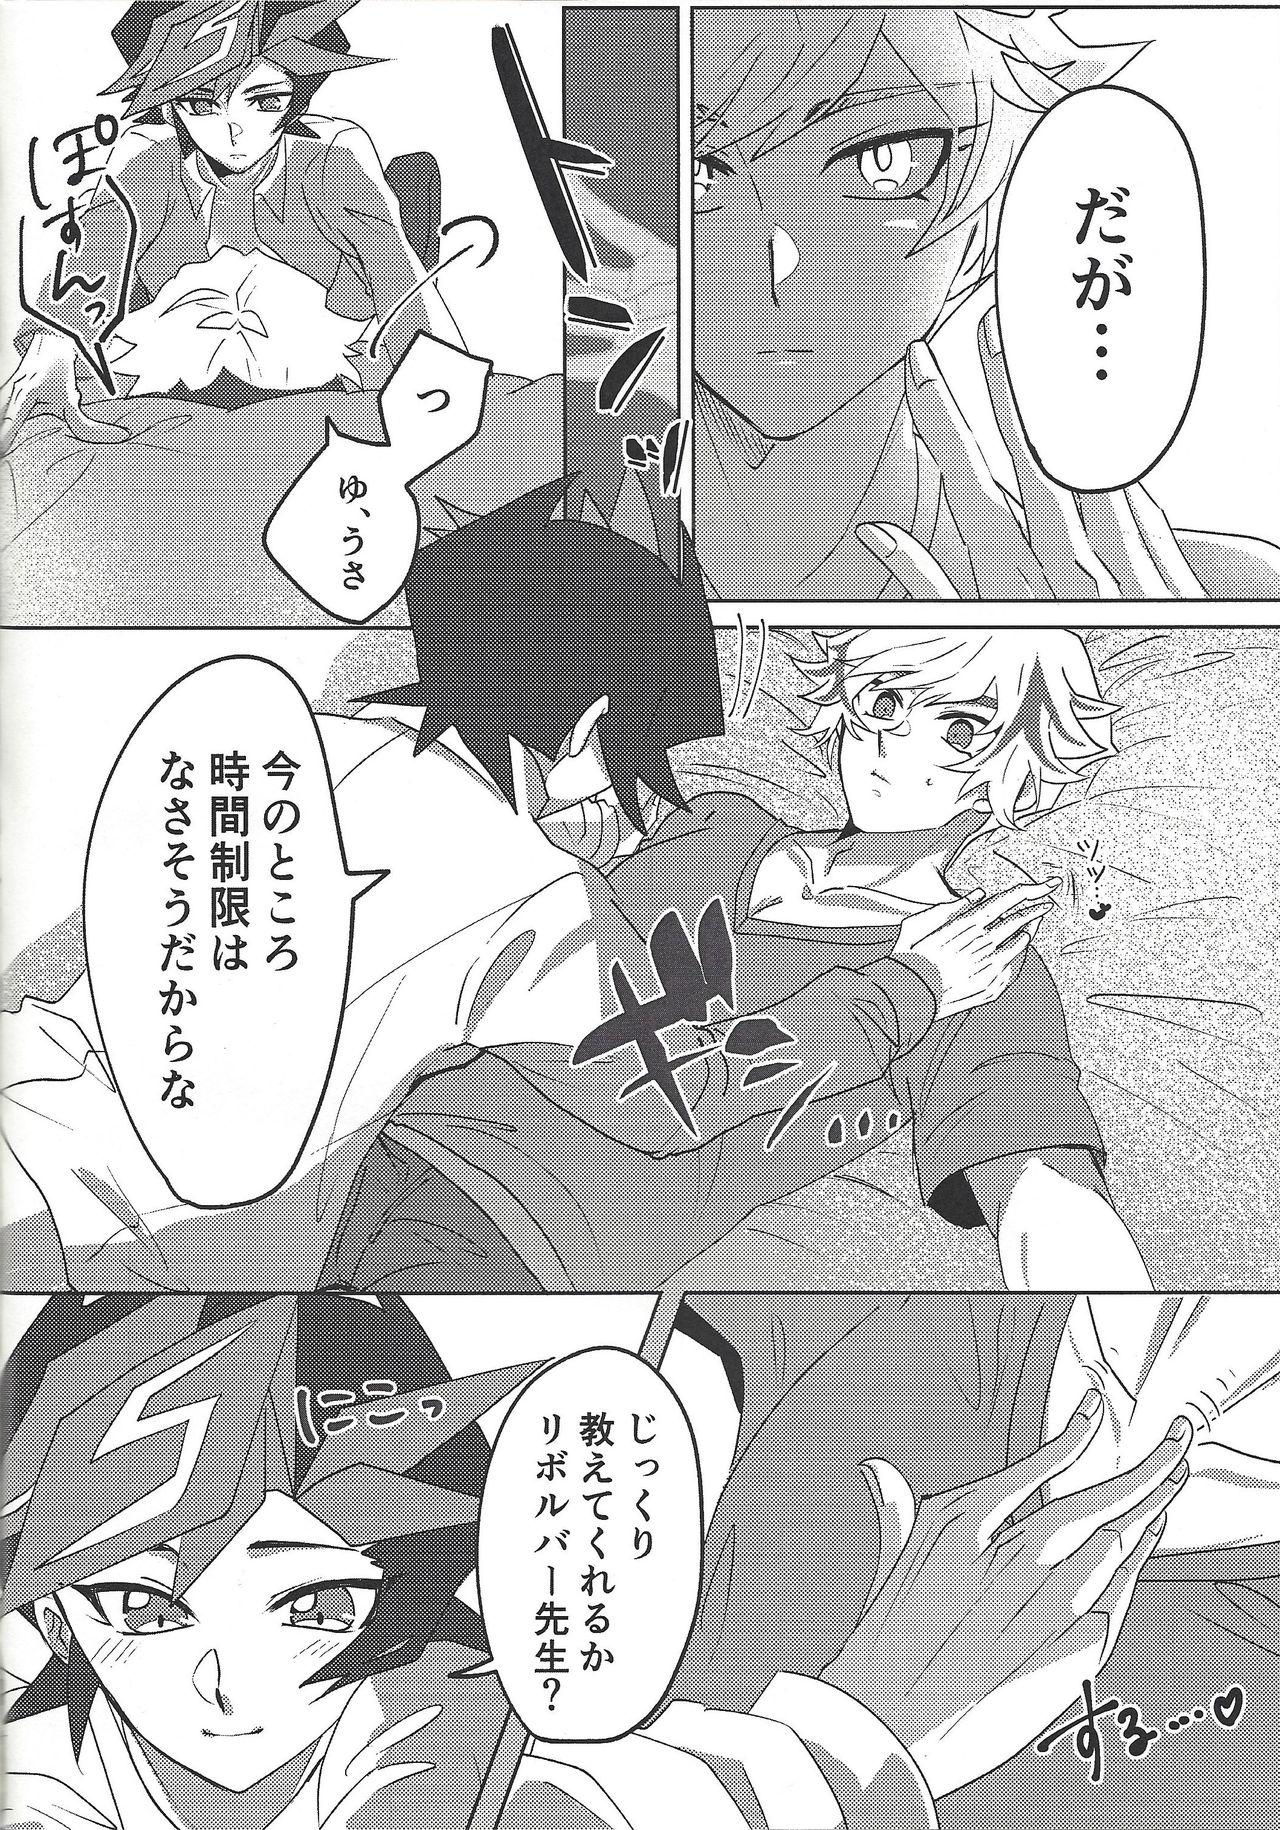 Best Blowjob Ever Ore to aitsu no S. M. T charenji! - Yu-gi-oh vrains Piercing - Page 9